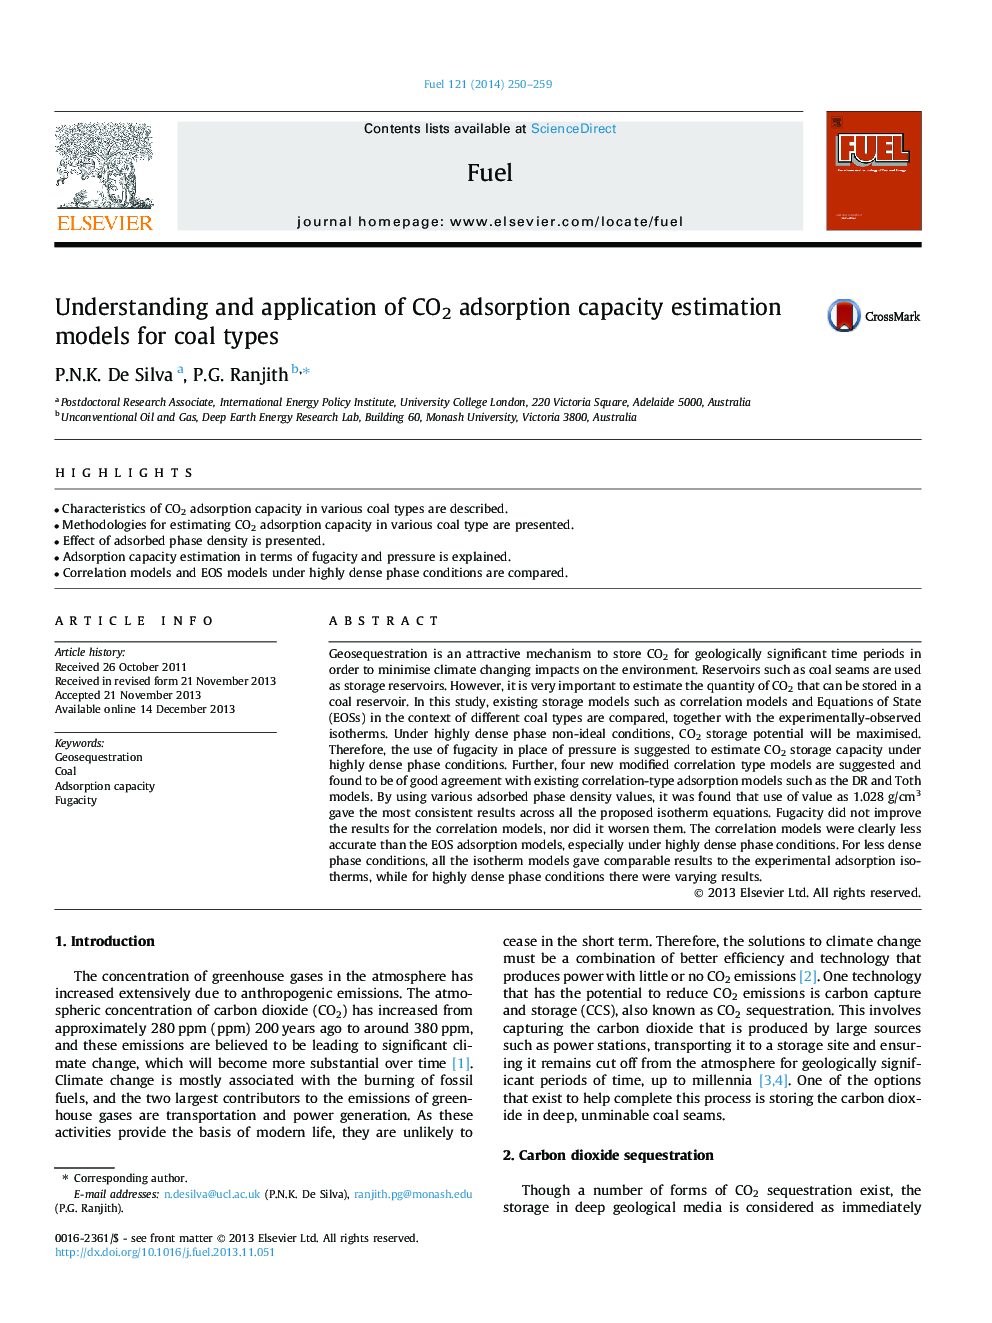 Understanding and application of CO2 adsorption capacity estimation models for coal types